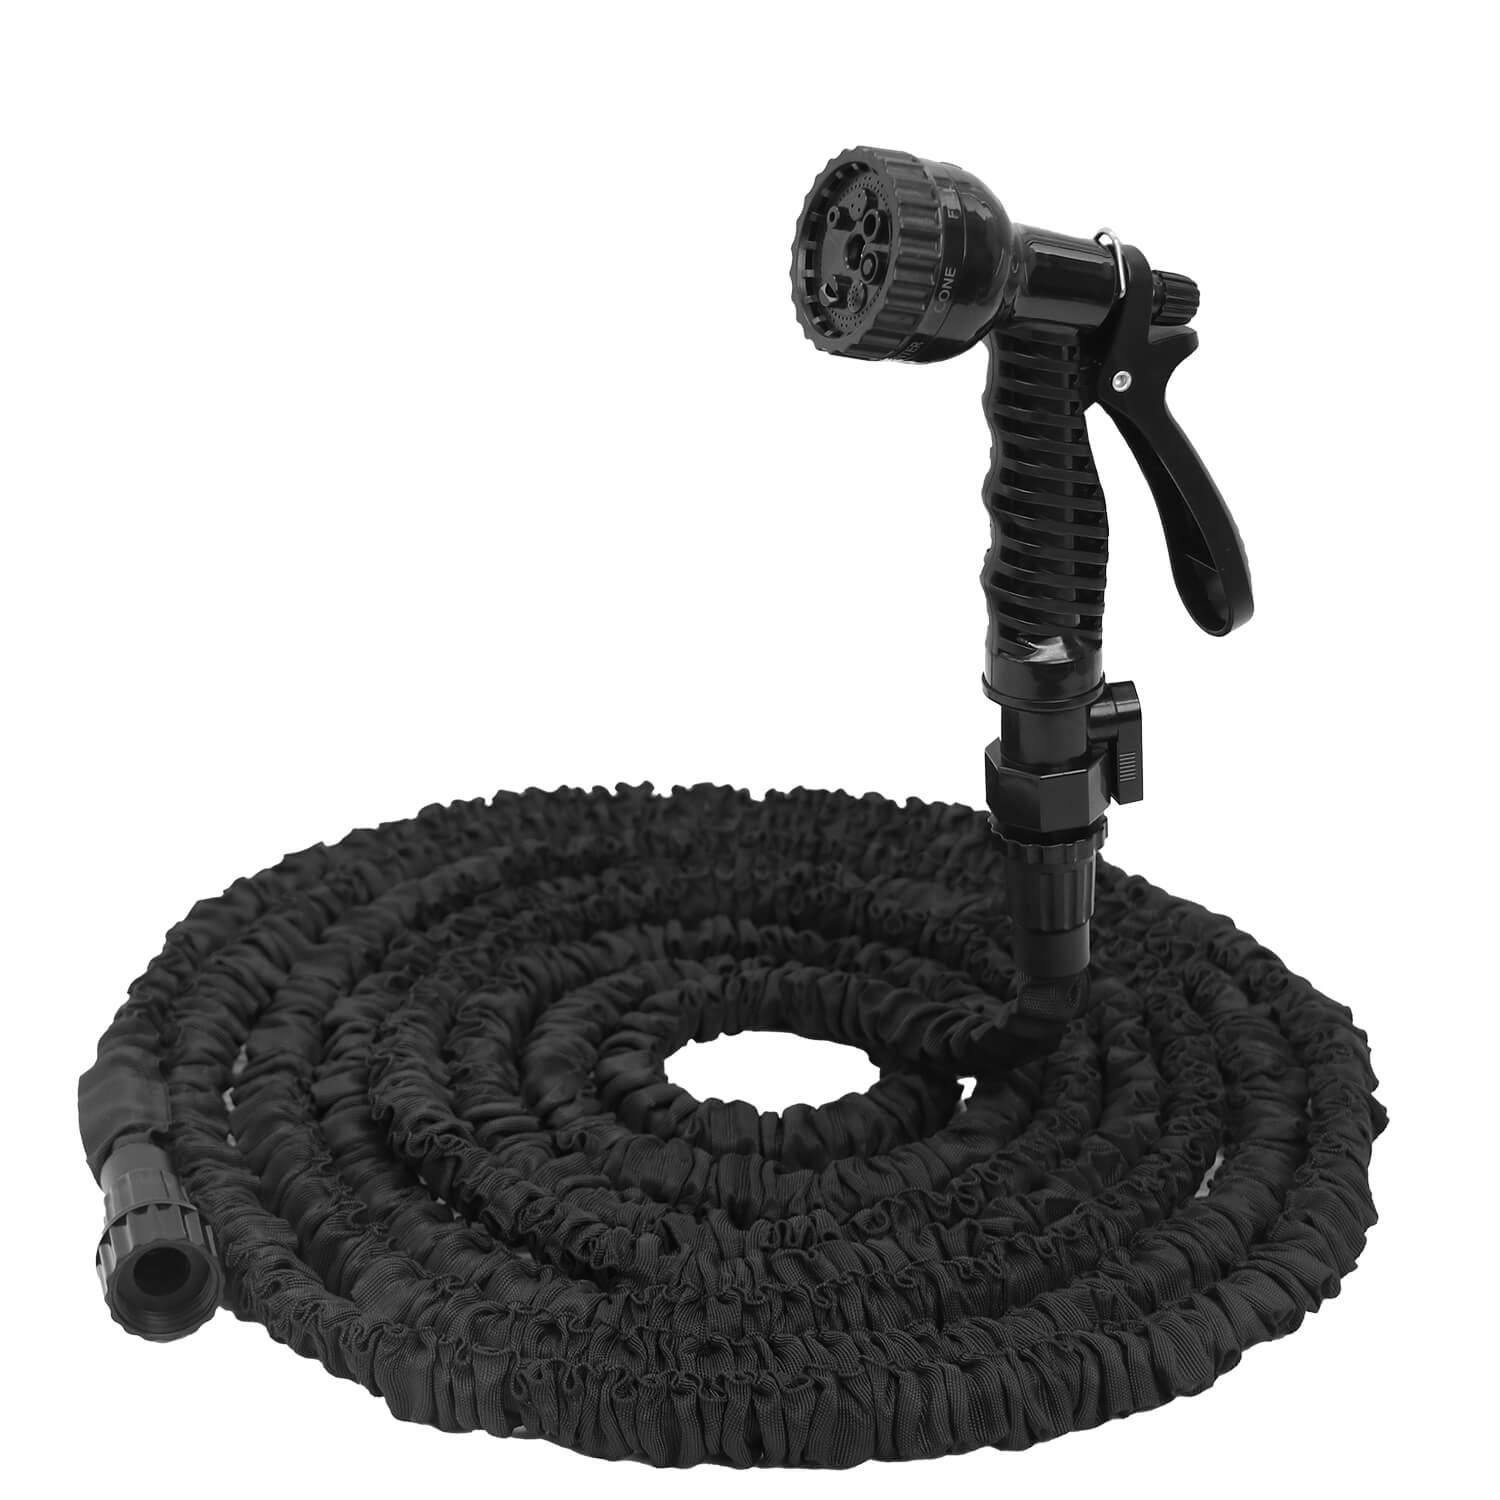 GardenJoy Expandable Water Hose 100ft with 7 Function Spray Nozzle